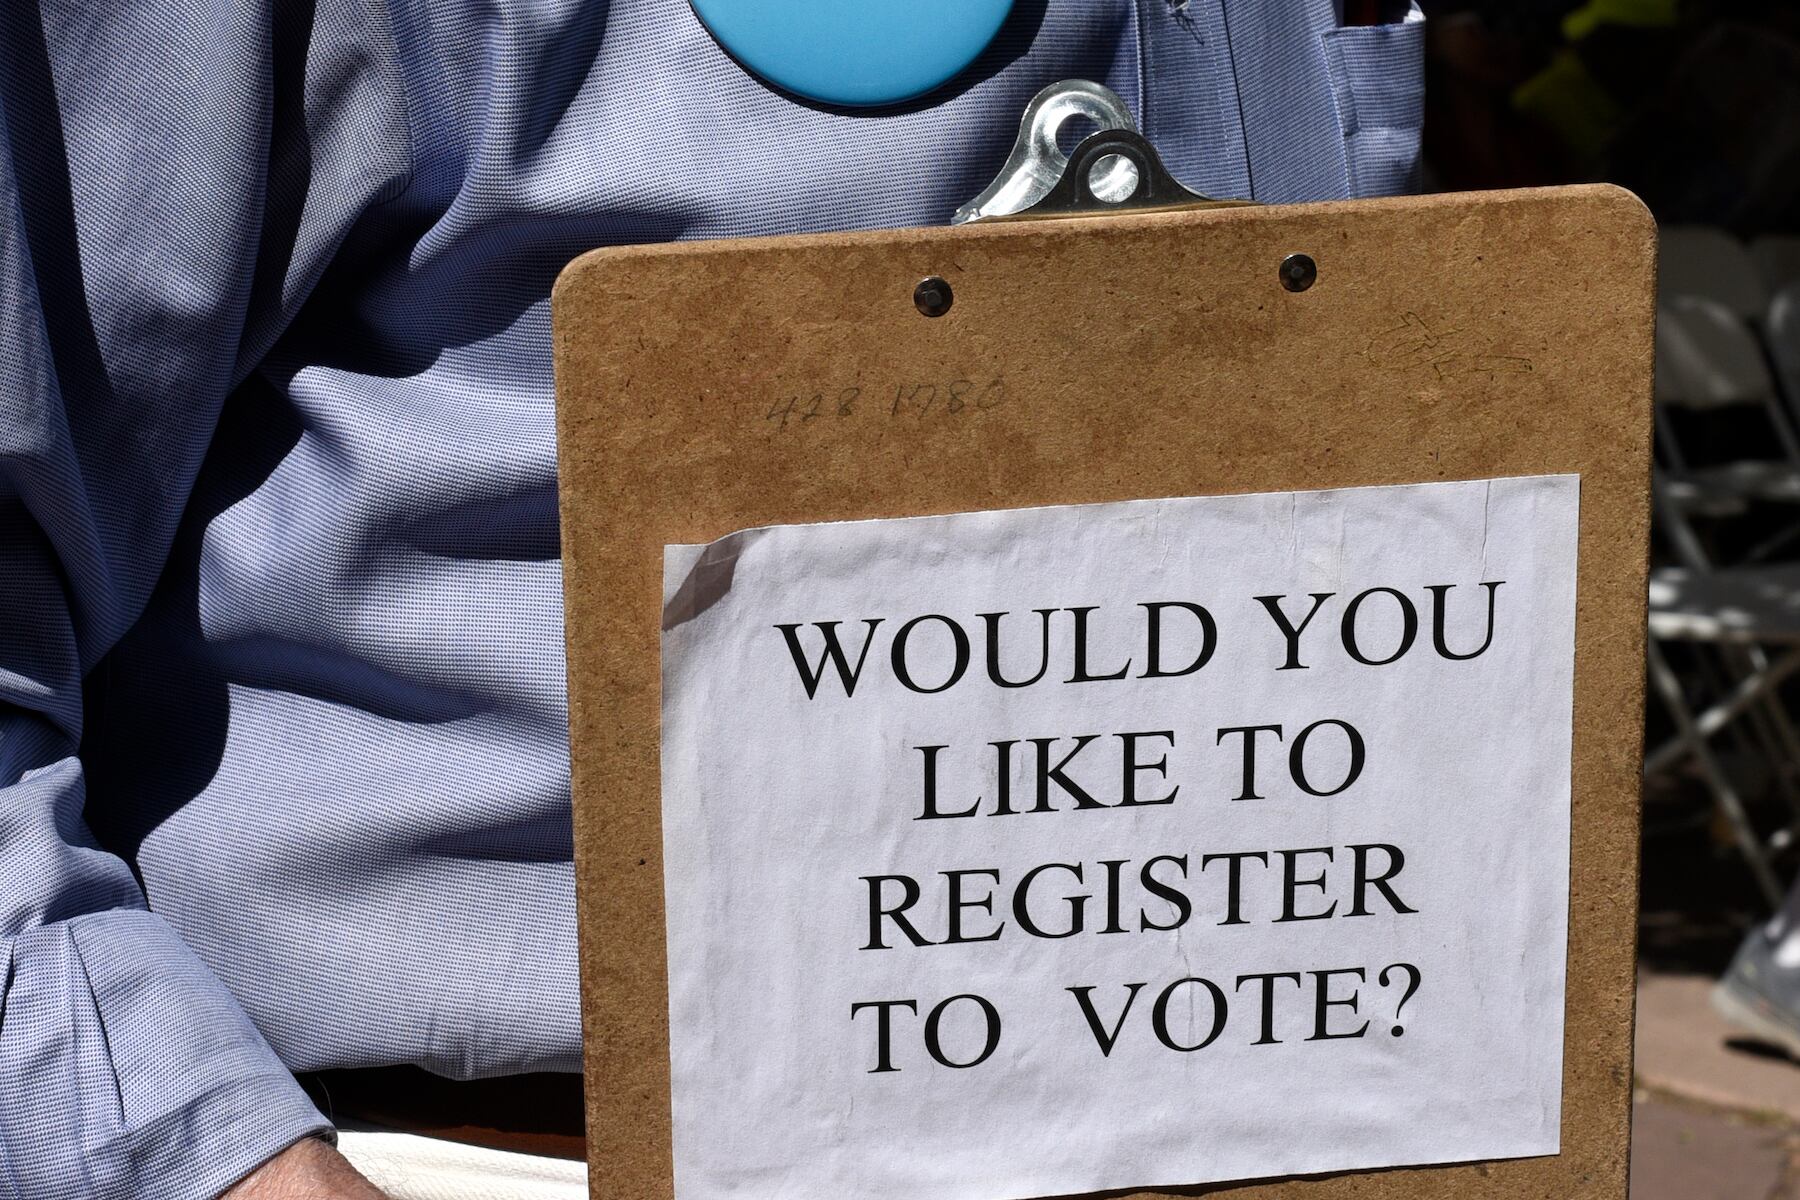 A man in a blue shirt holds a clipboard, the back of which has a page taped to it reading “Would you like to register to vote?”